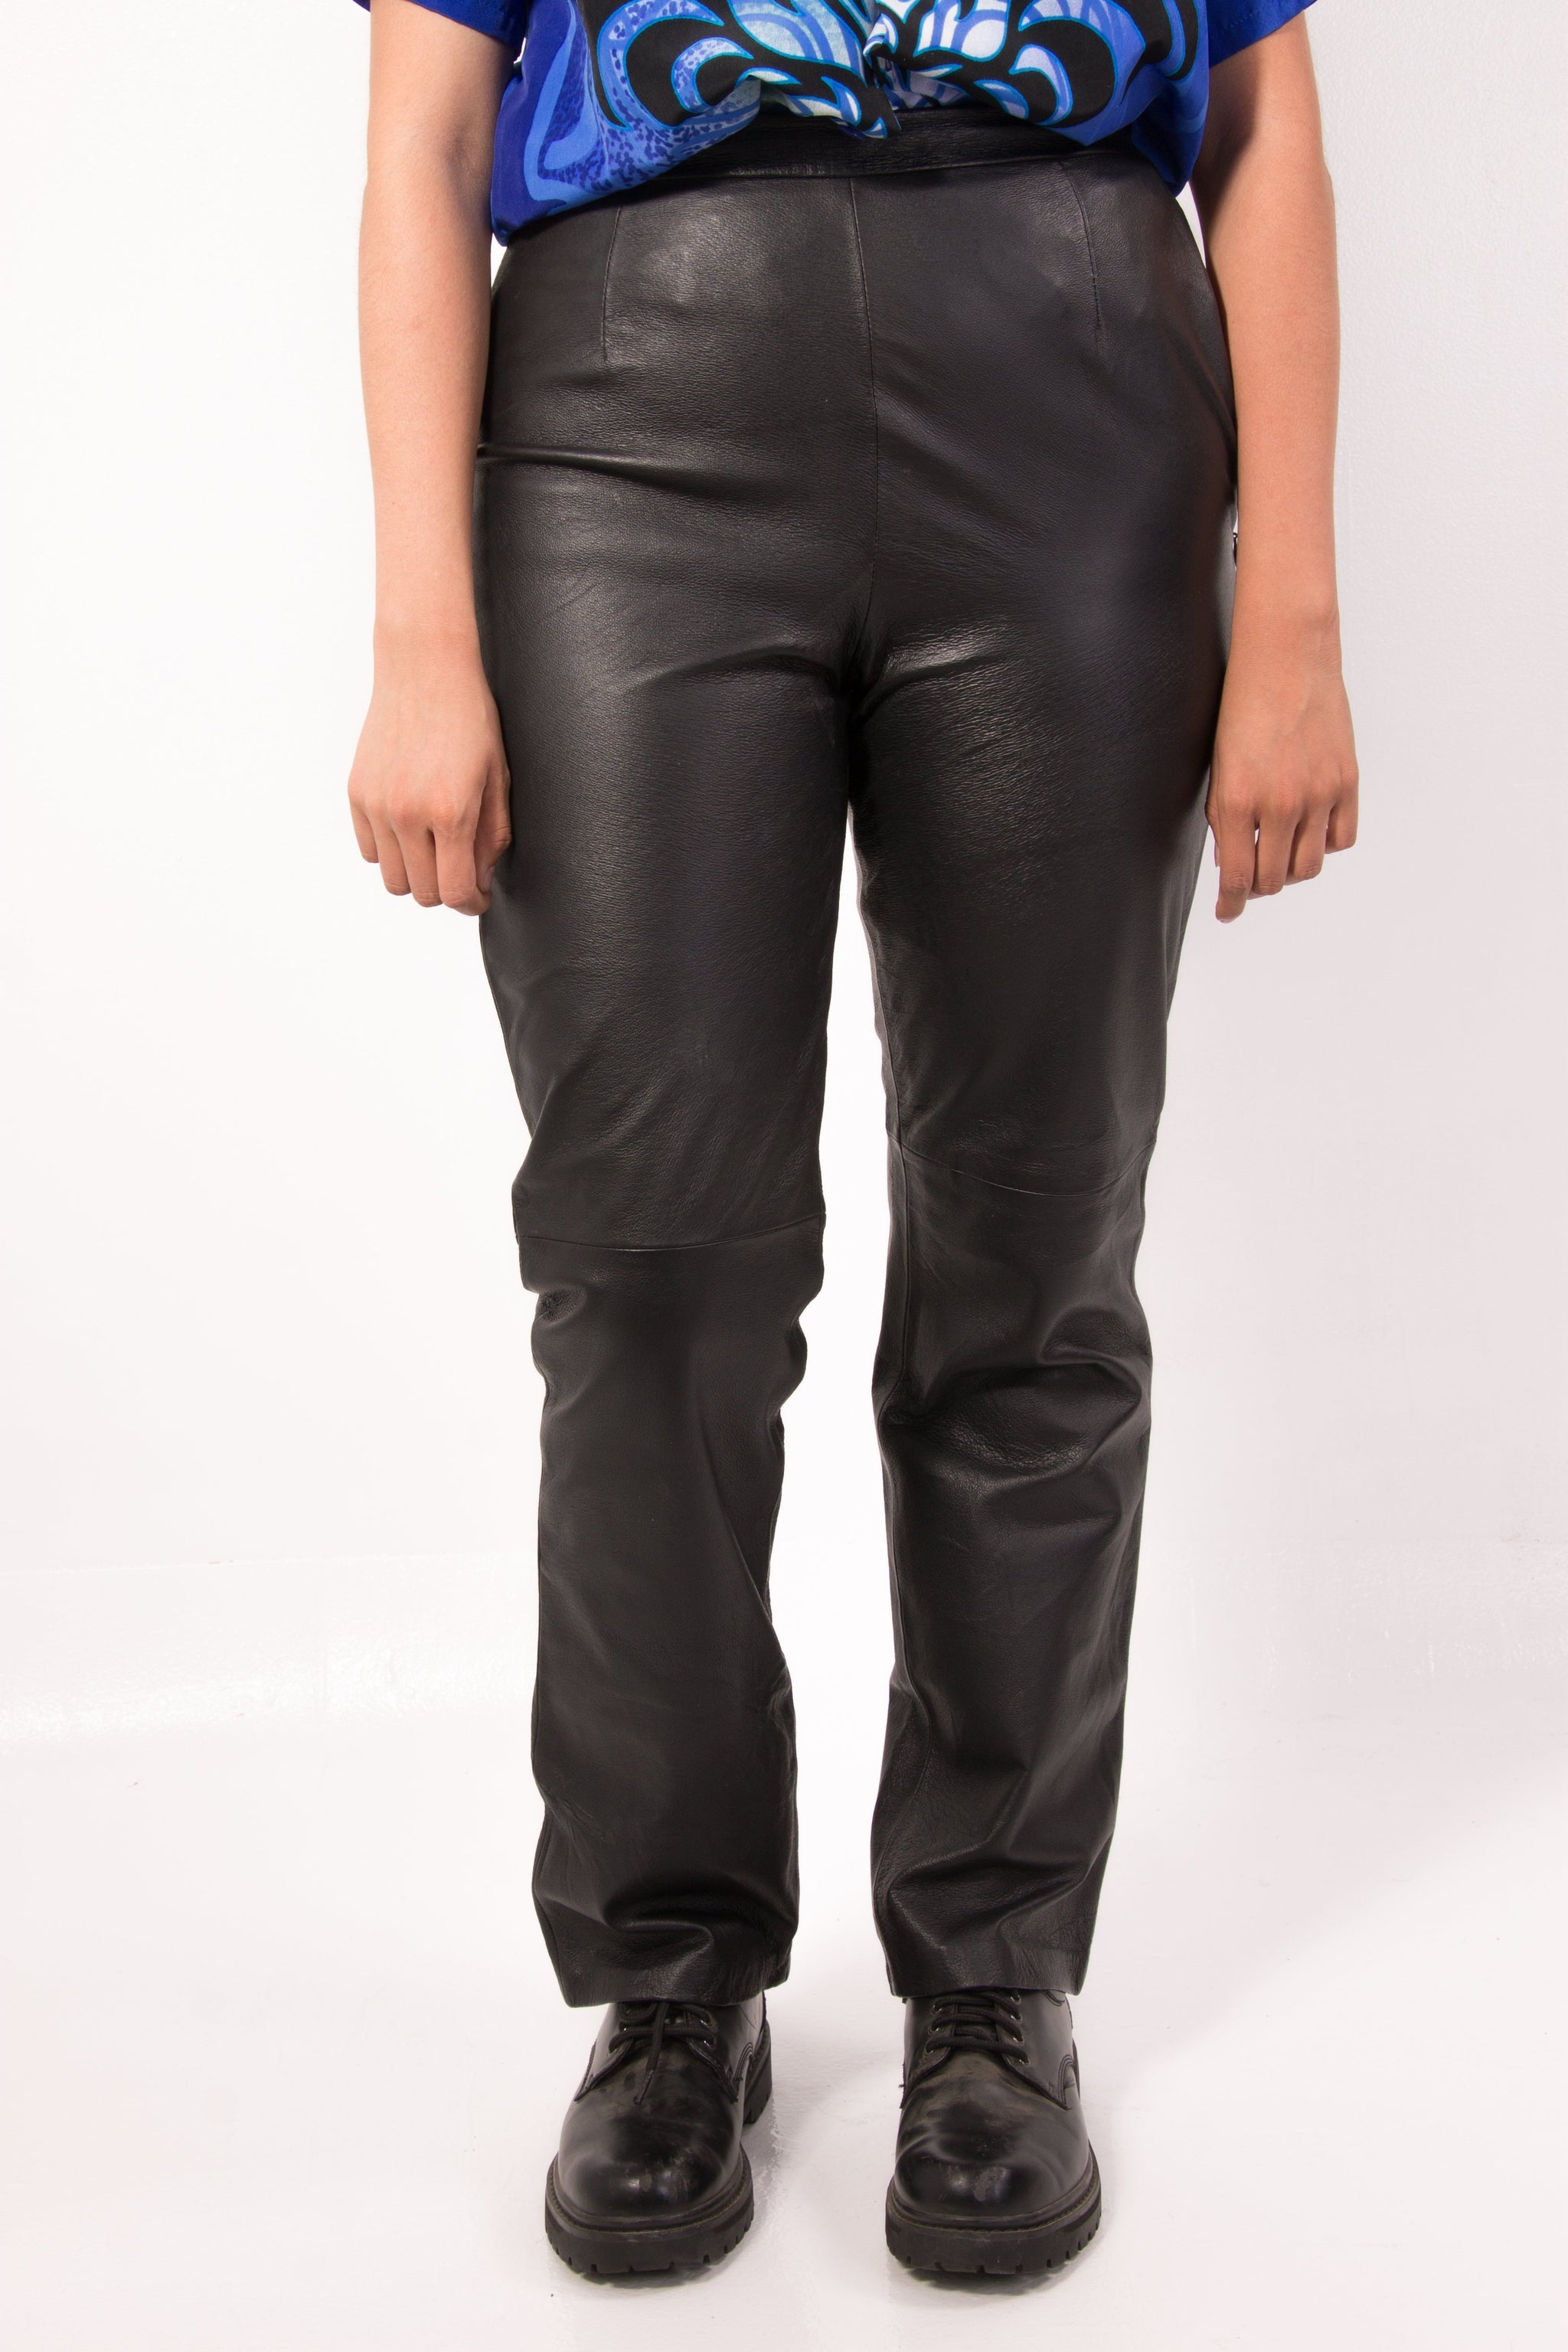 old leather pants